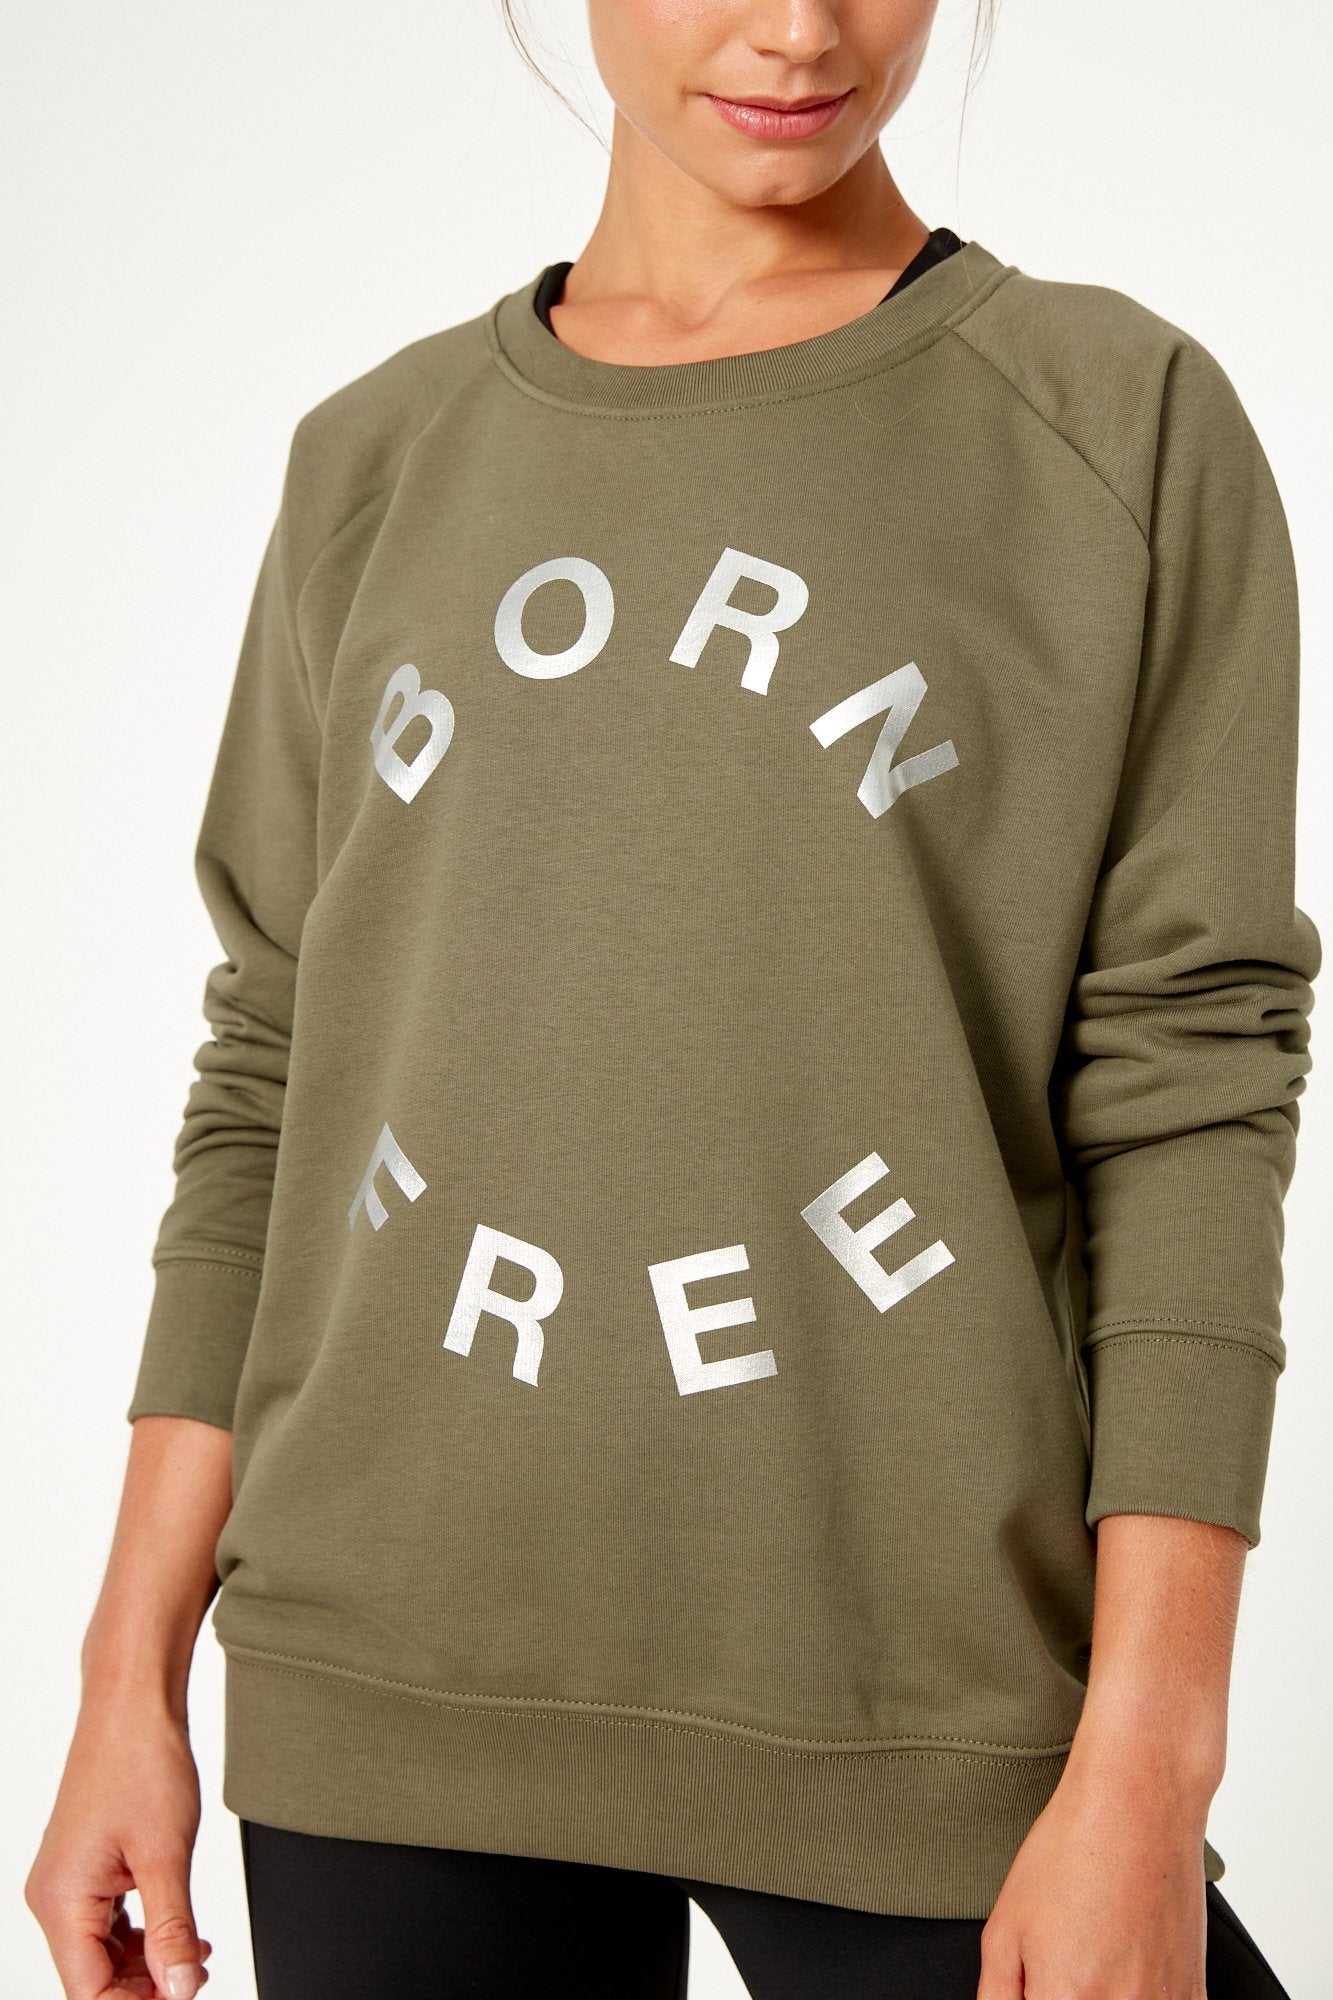 Khaki Green Sweatshirt with Crew Neck and Silver Detail by Born Nouli